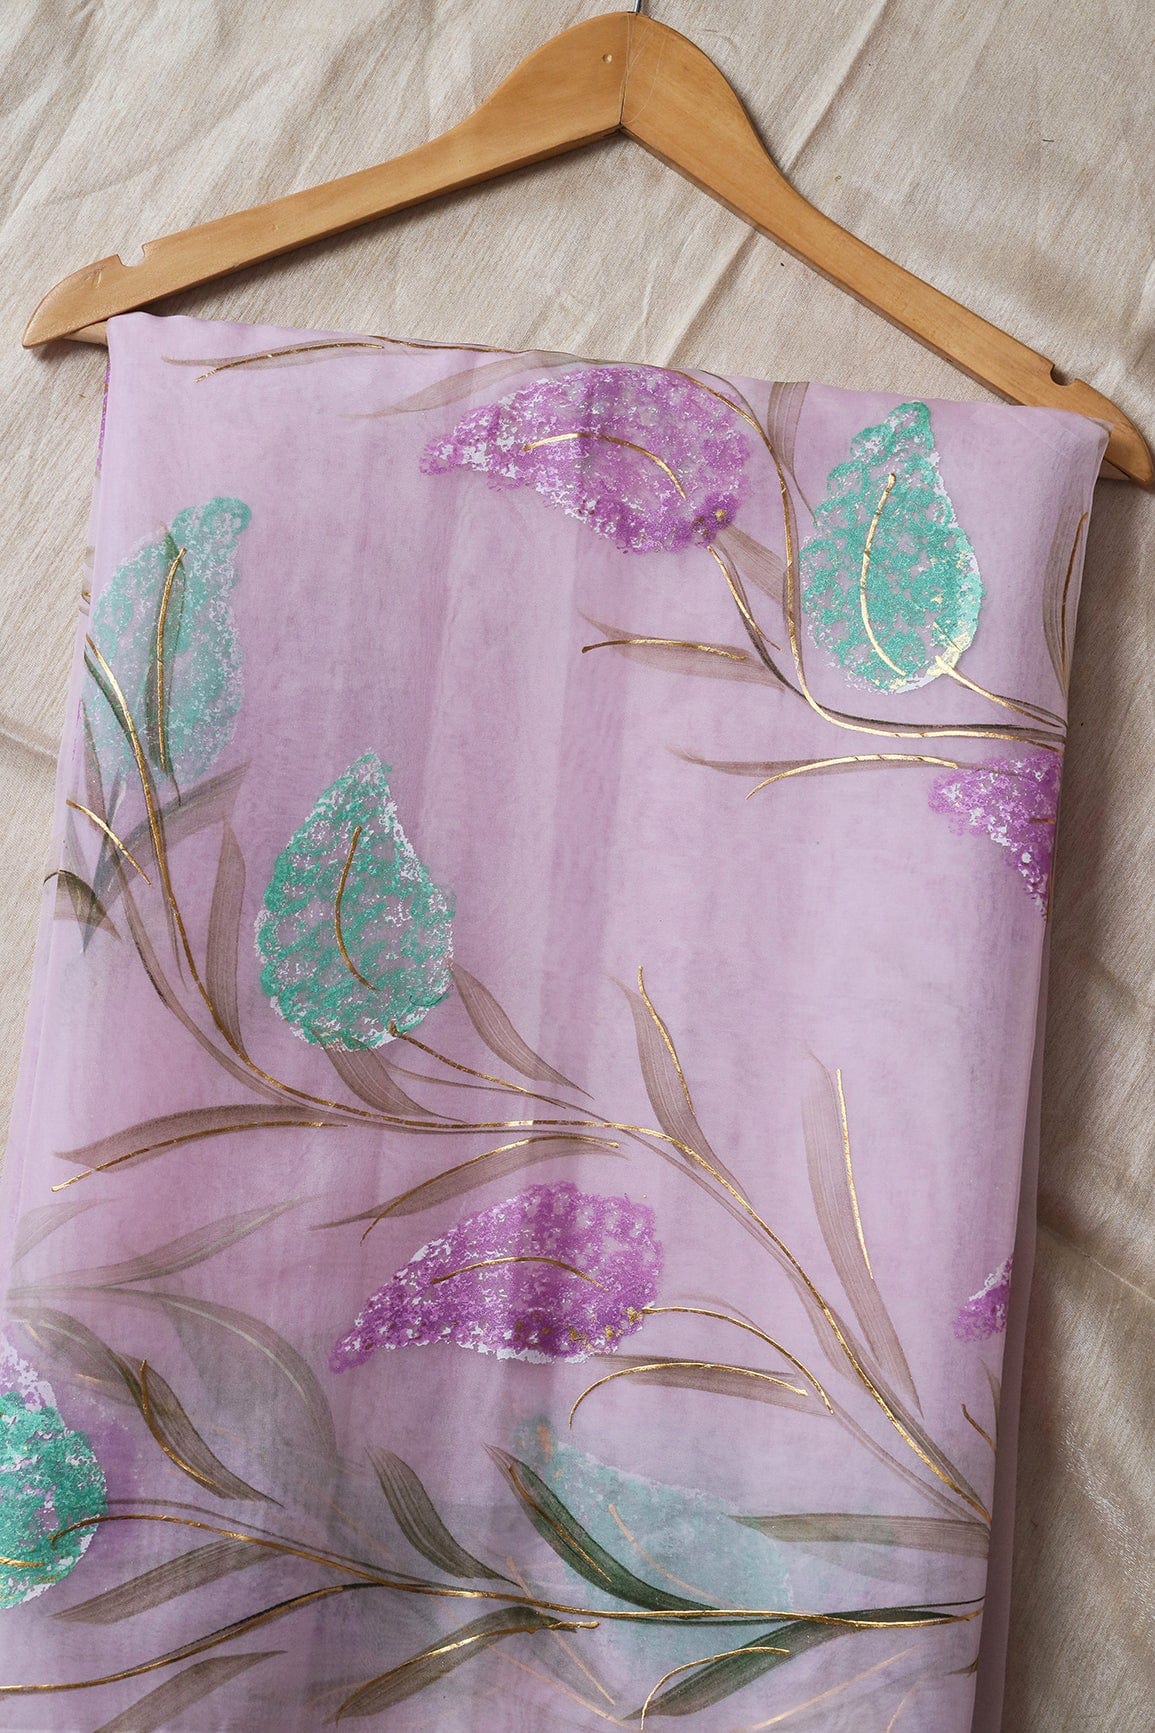 doeraa Saree Beautiful Leafy Hand Painted With Foil Work On Lavender Organza Saree ( 5.5 Meters)